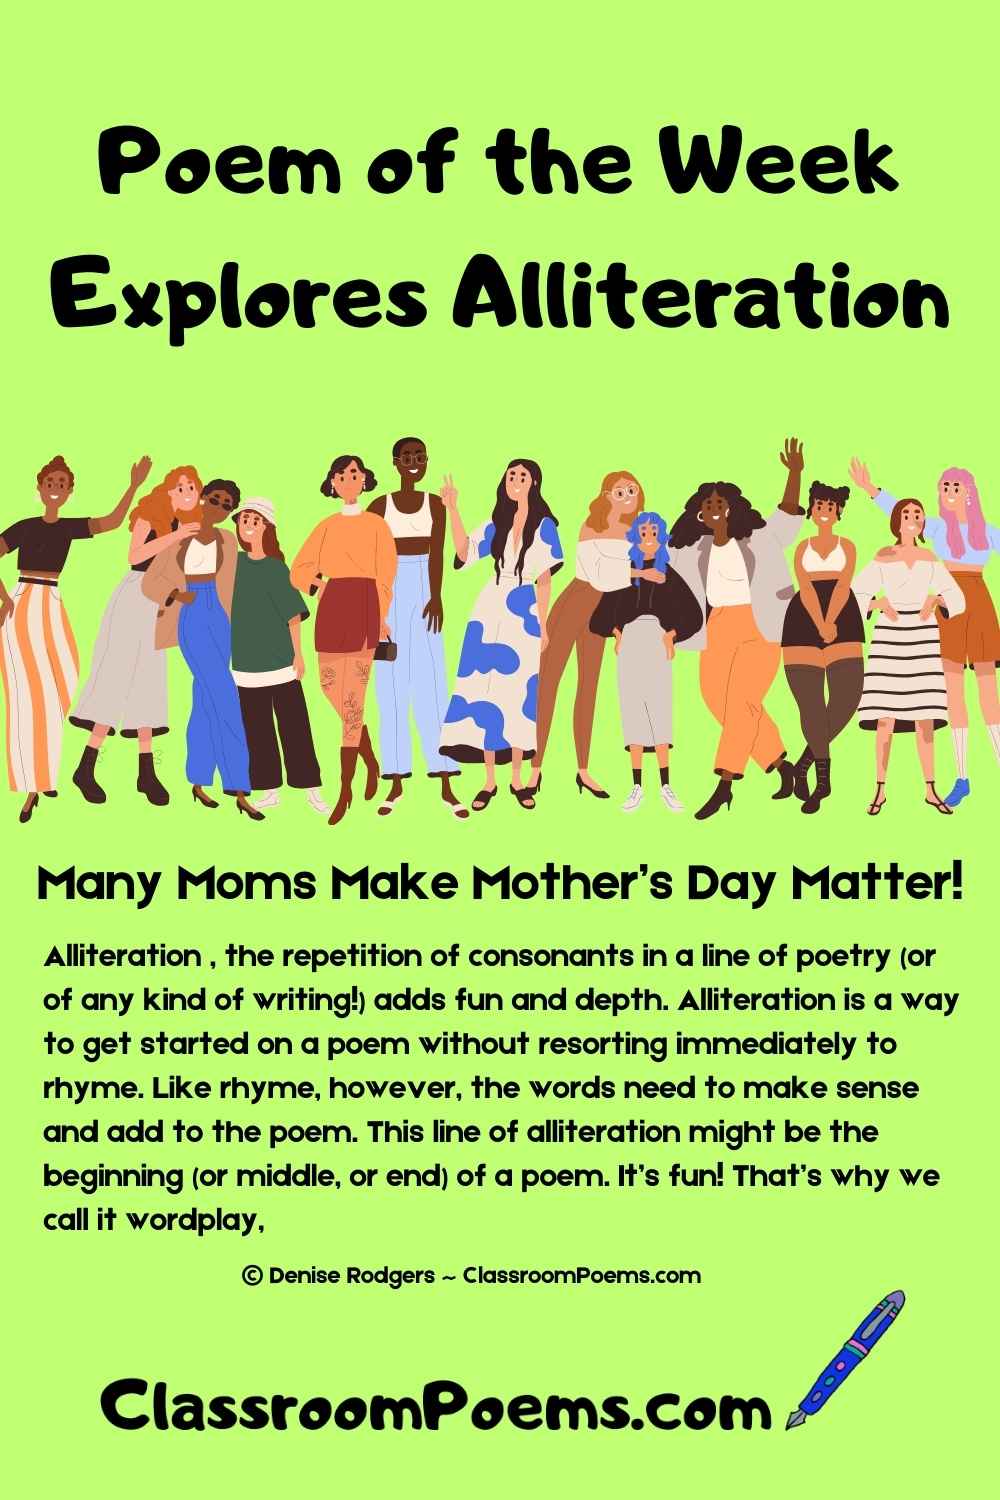 Alliteration examples and poems by Denise Rodgers on ClassroomPoems.com.